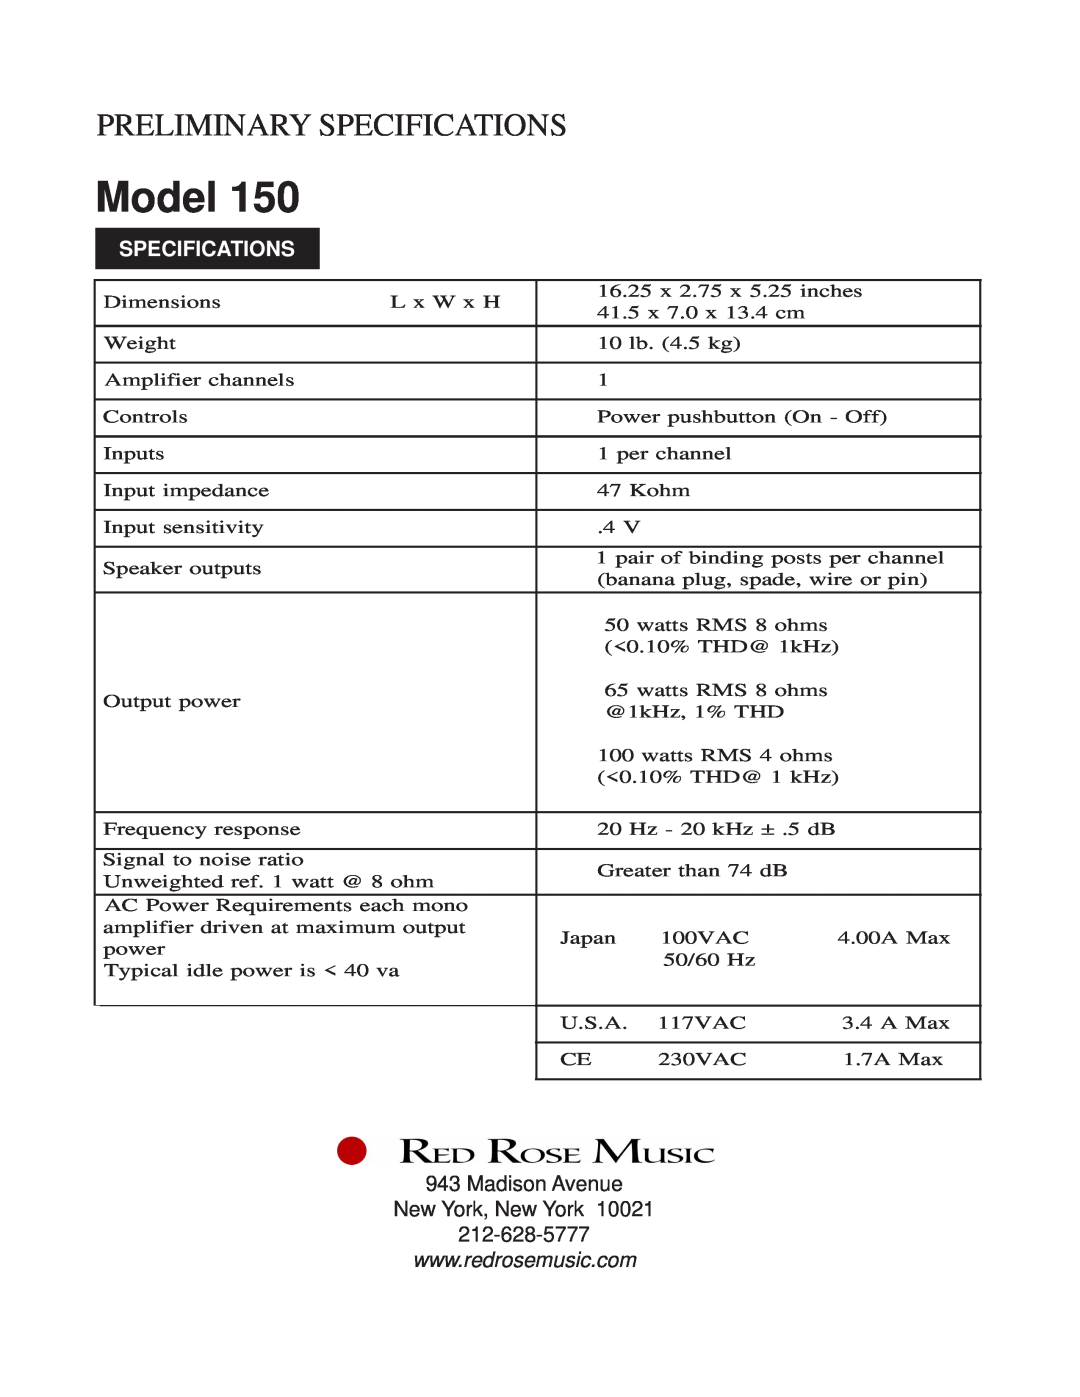 Red Rose Music 150 manual Madison Avenue New York, New York, Model, Preliminary Specifications 